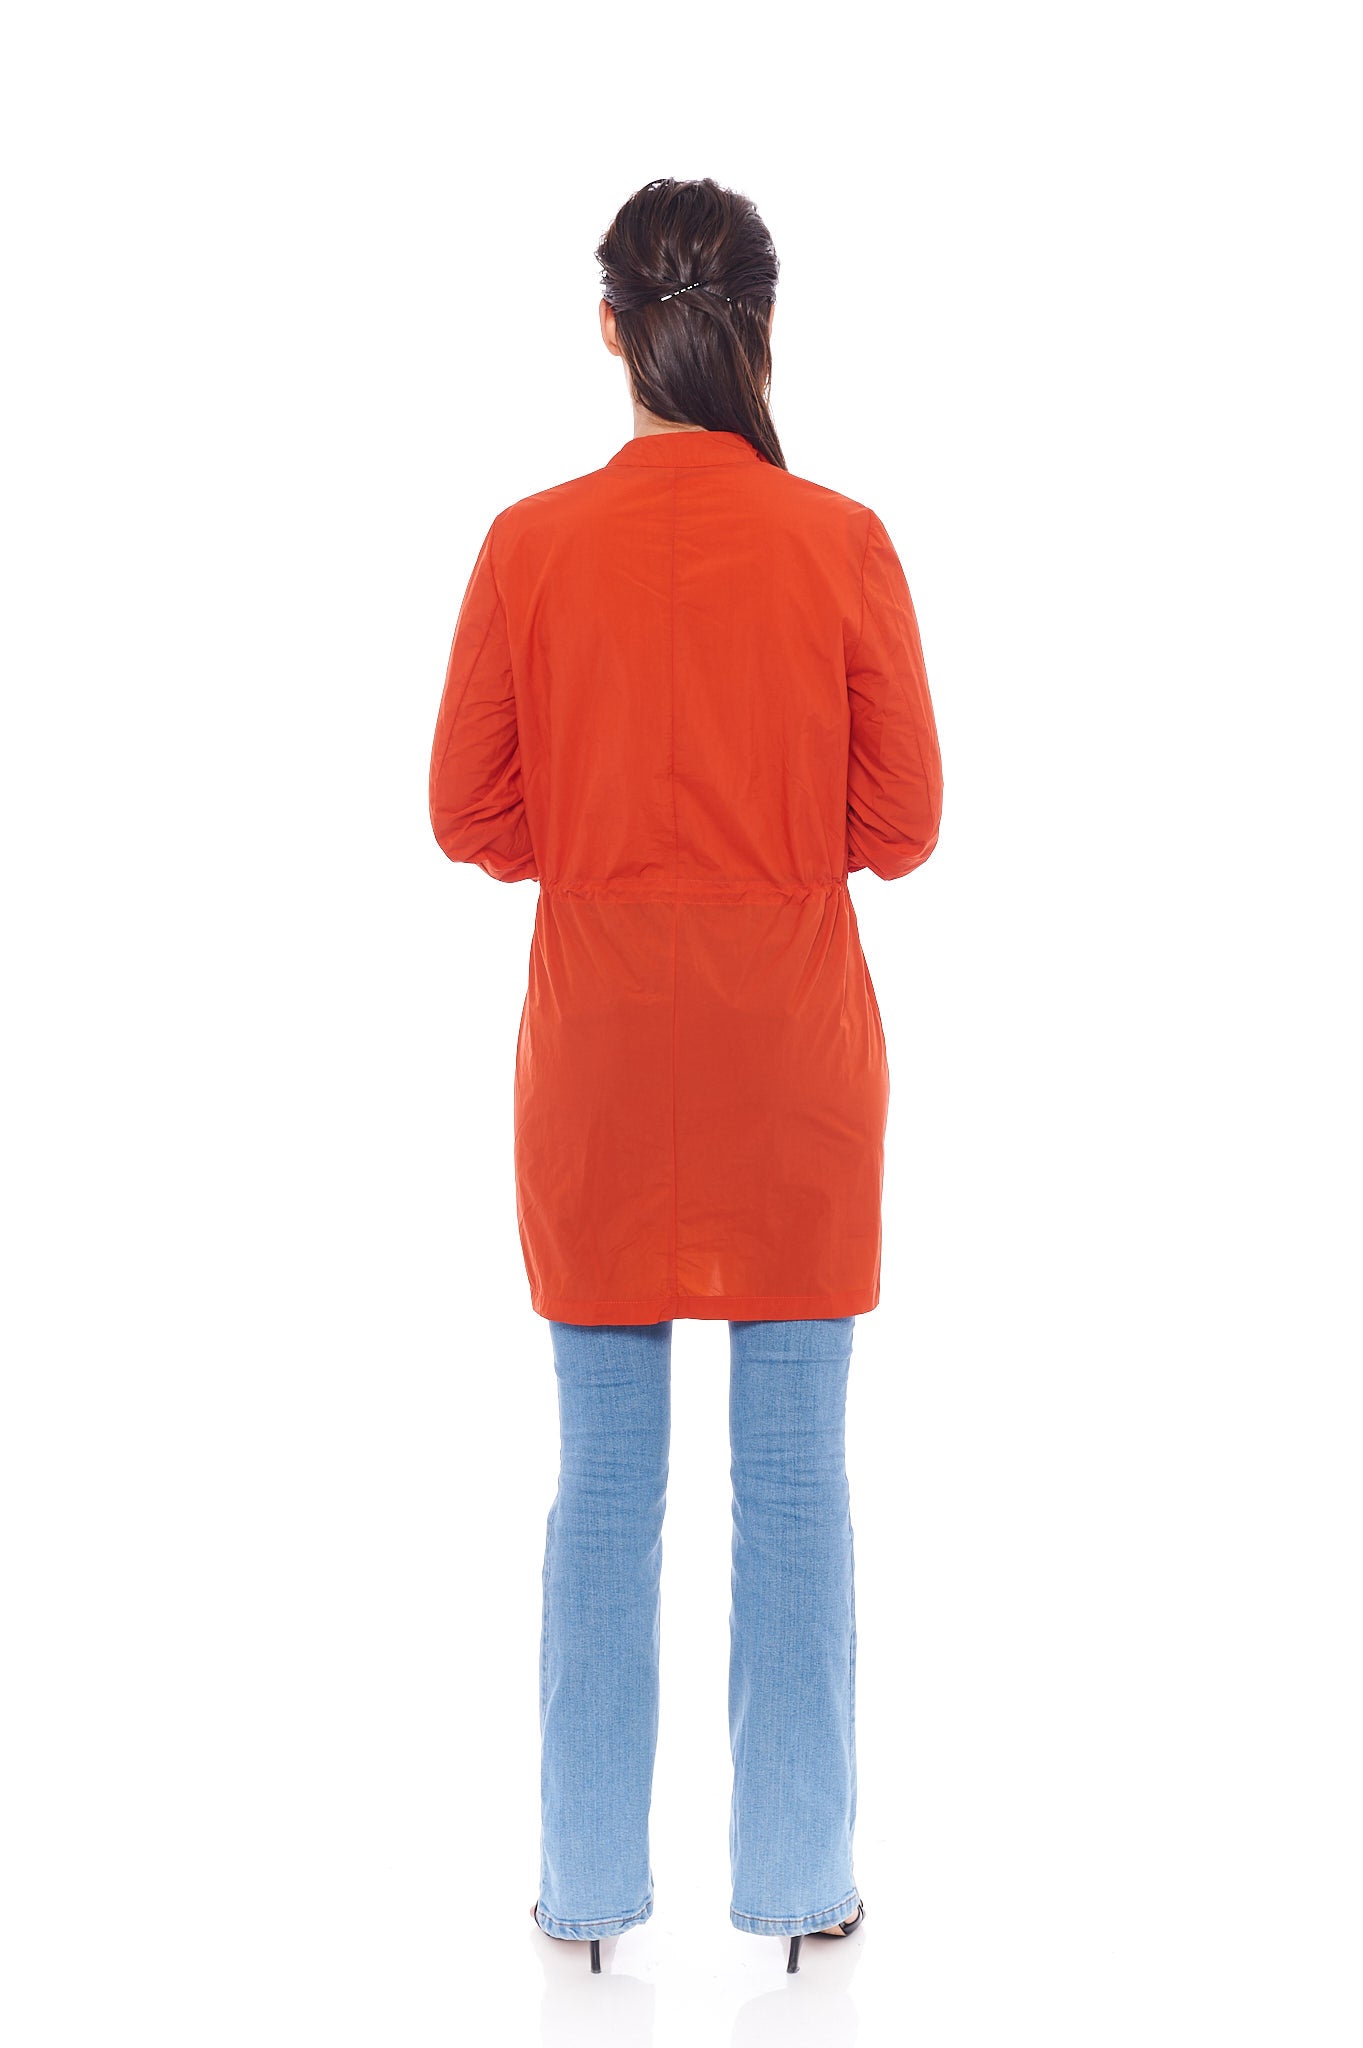 THE CORAL TURNDOWN JACKET IN TANGY ORANGE